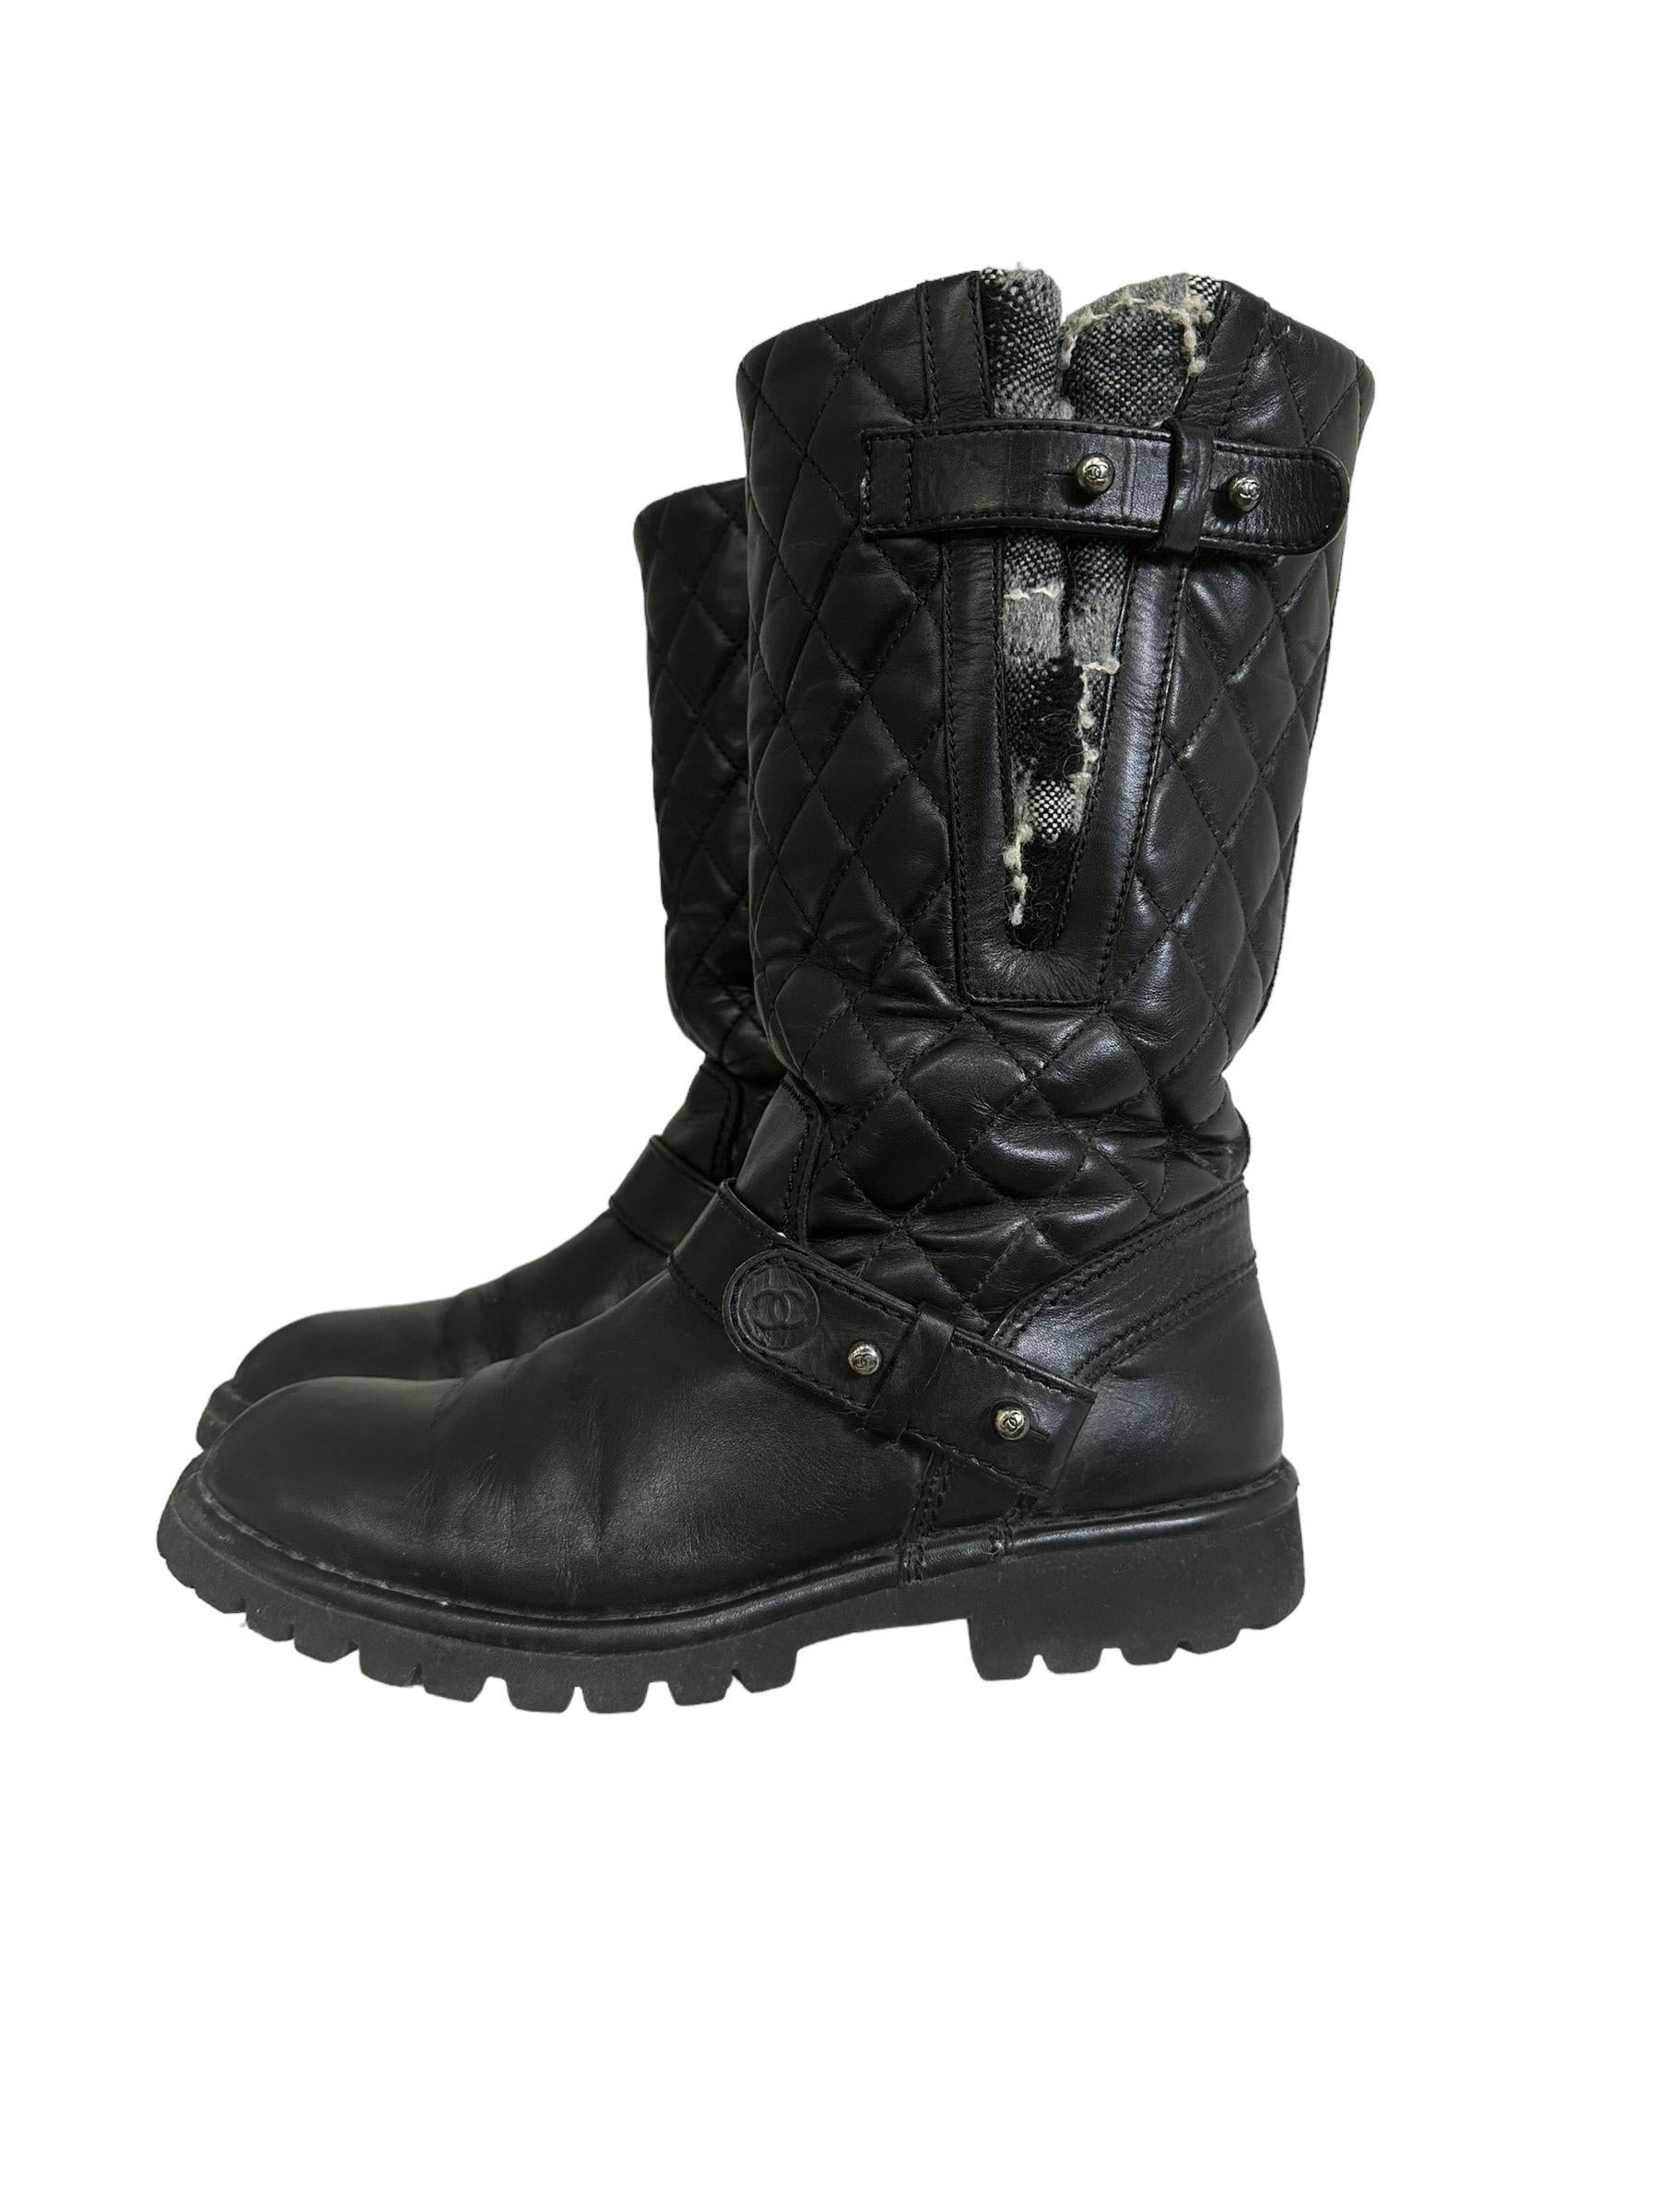 Boot signed Chanel, biker model, made in quilted black leather with silver hardware. They have no opening whatsoever. Featuring a double buckle and gray tweed inserts. Italian number 38 and 1\2, they are in good condition, with light signs of wear